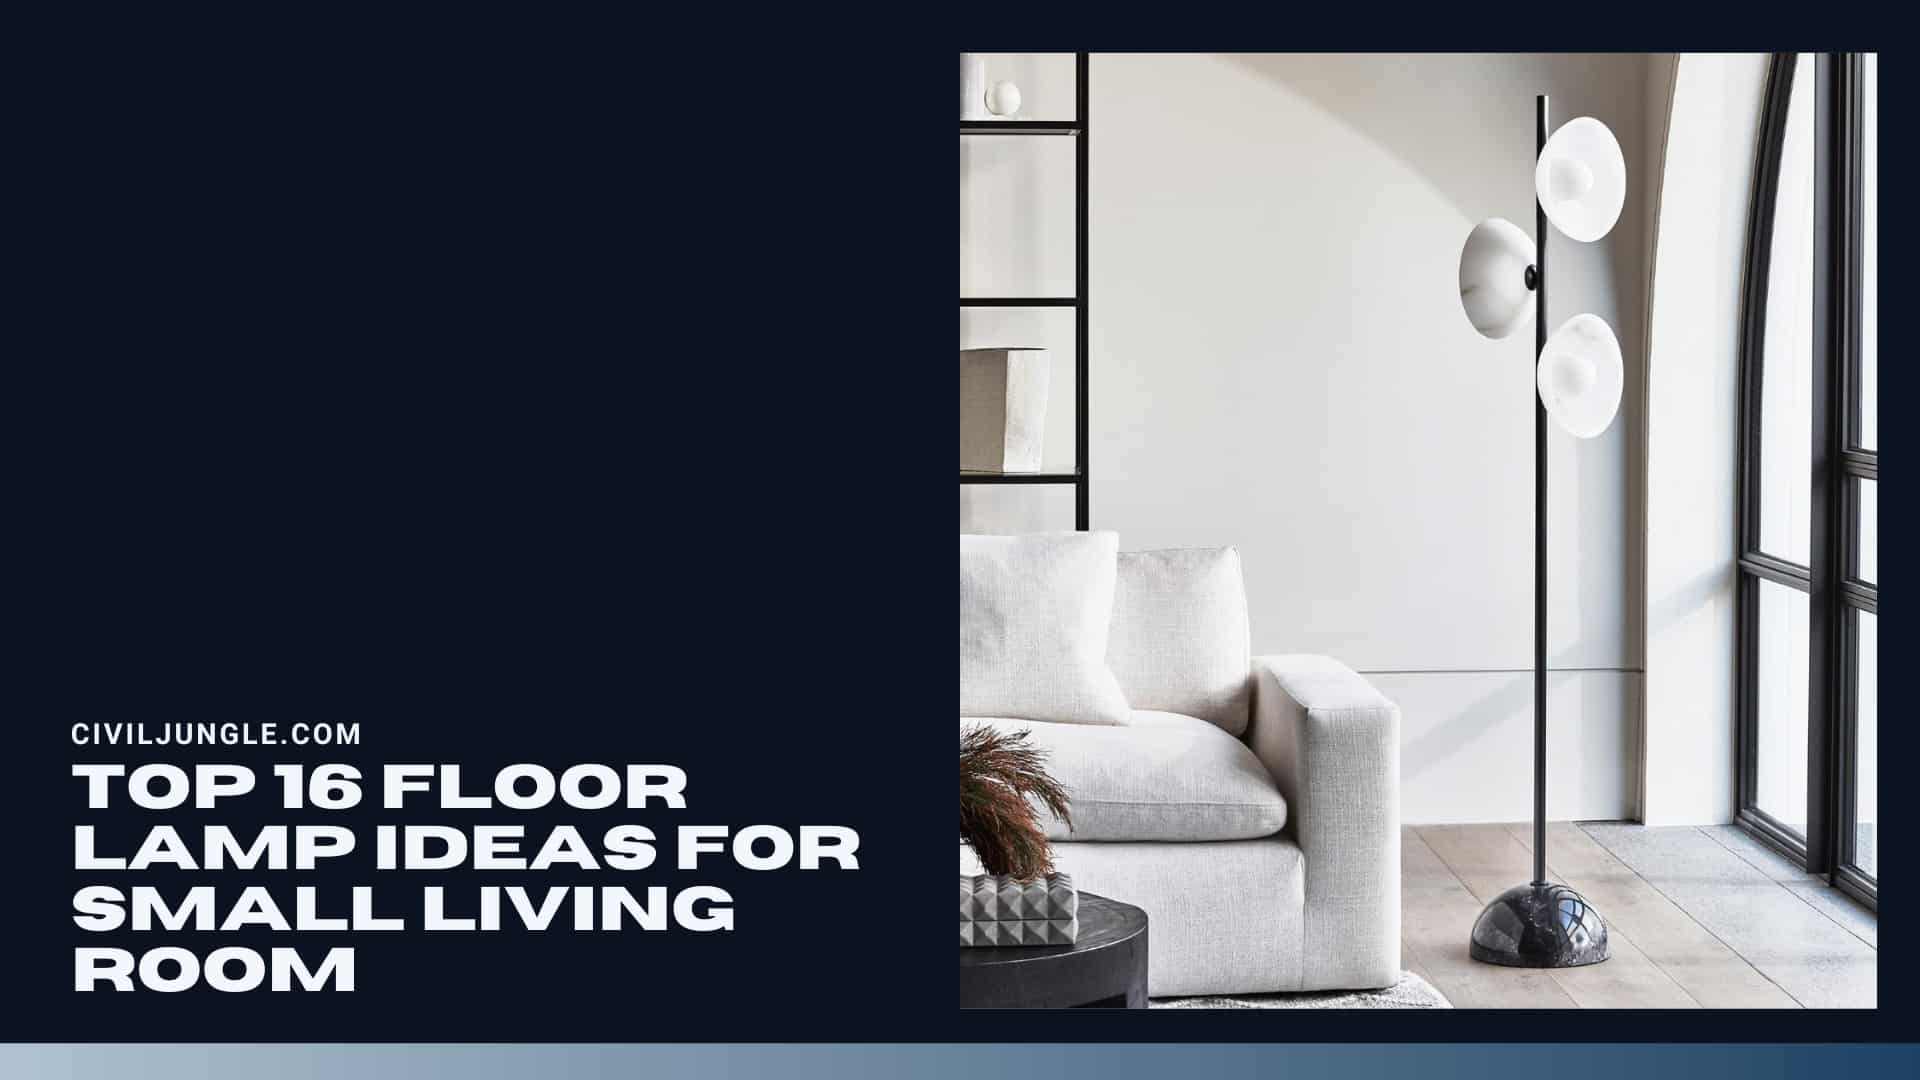 Top 16 Floor Lamp Ideas for Small Living Room